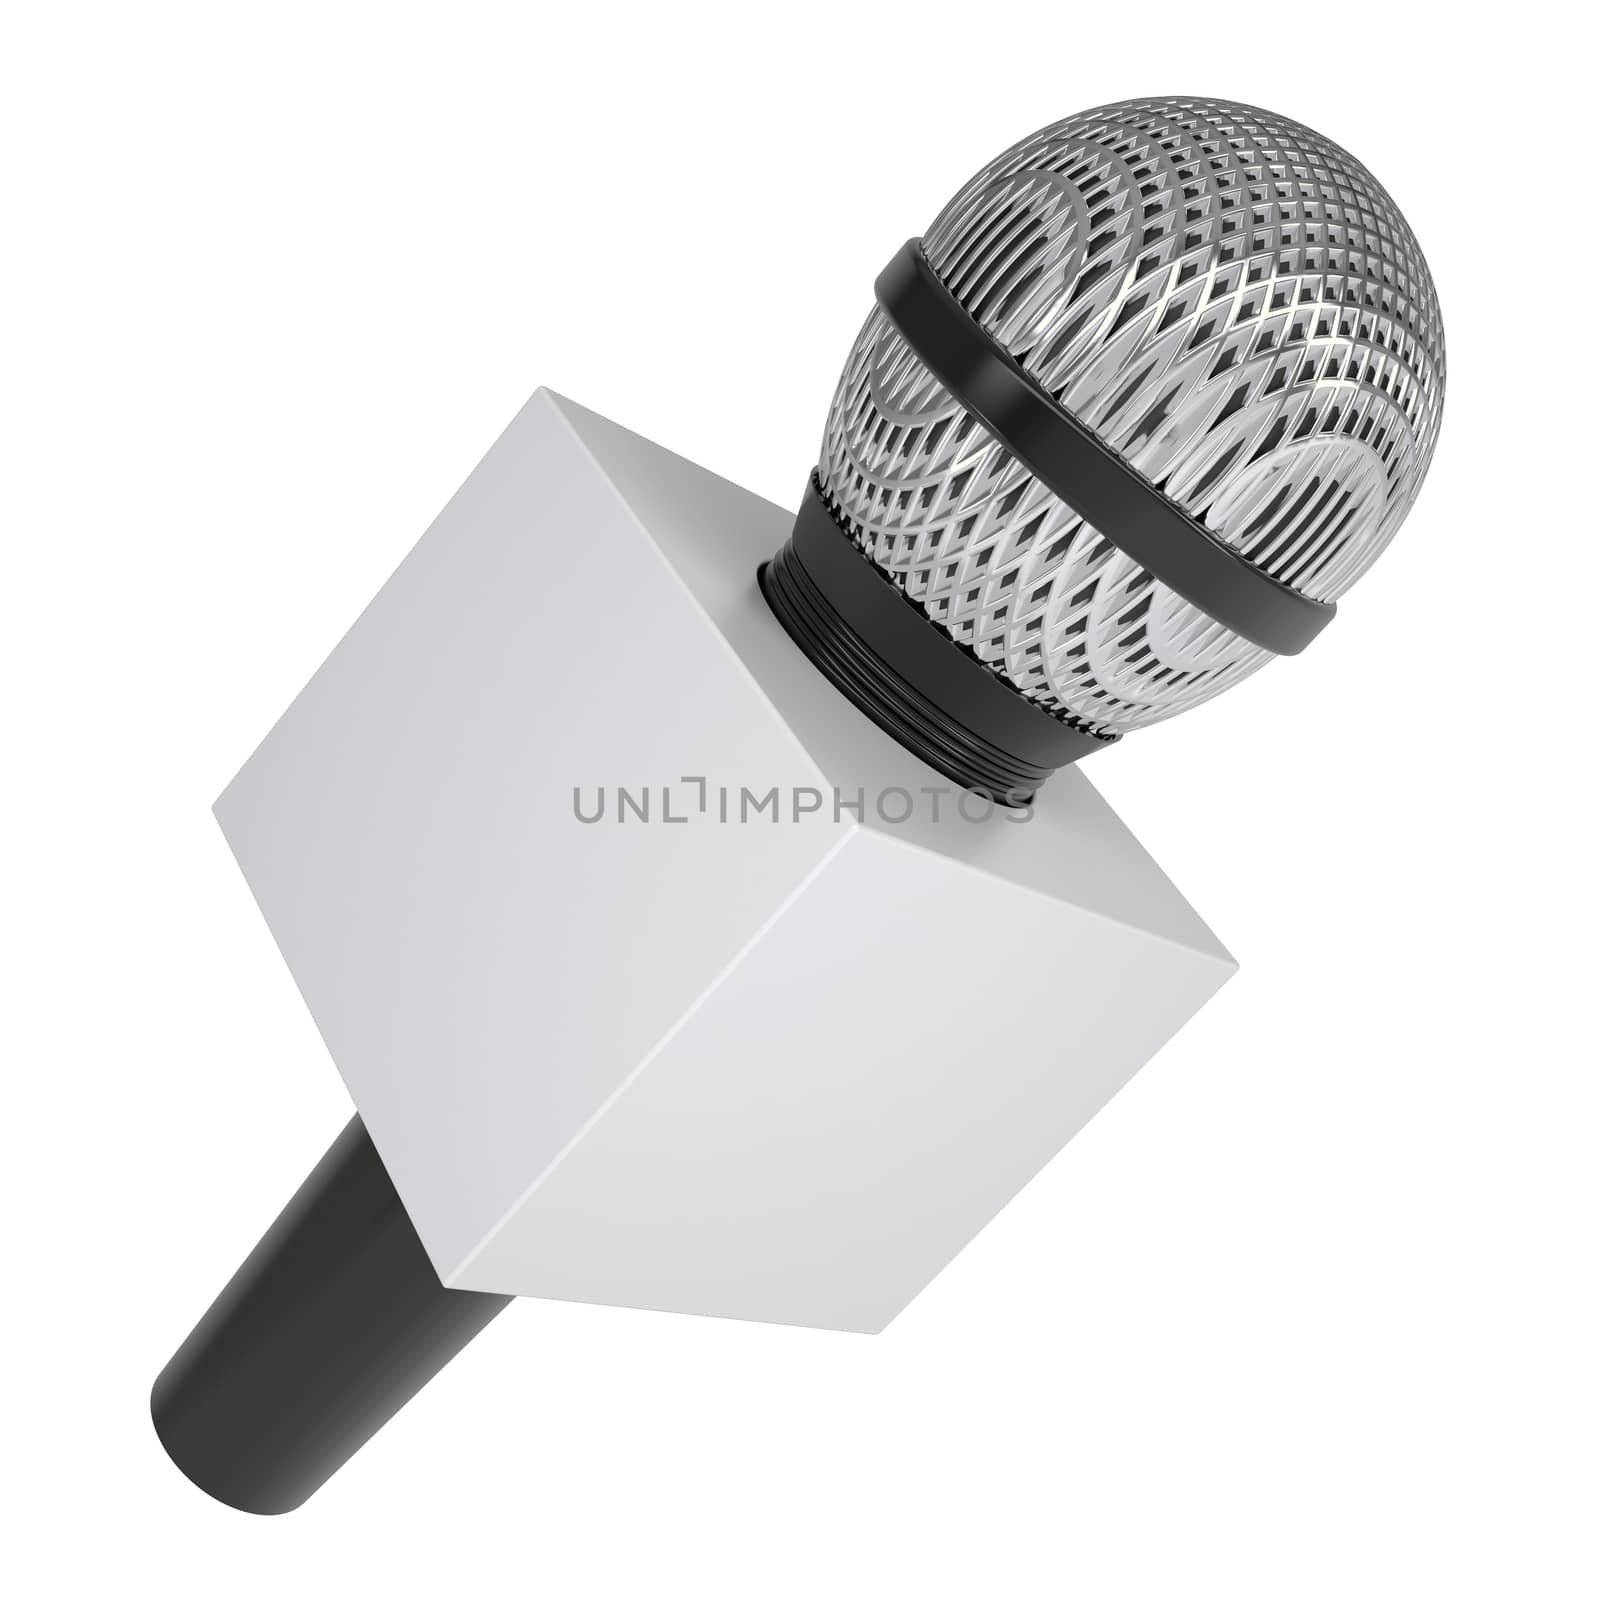 Television microphone with blank advertising cube by cherezoff